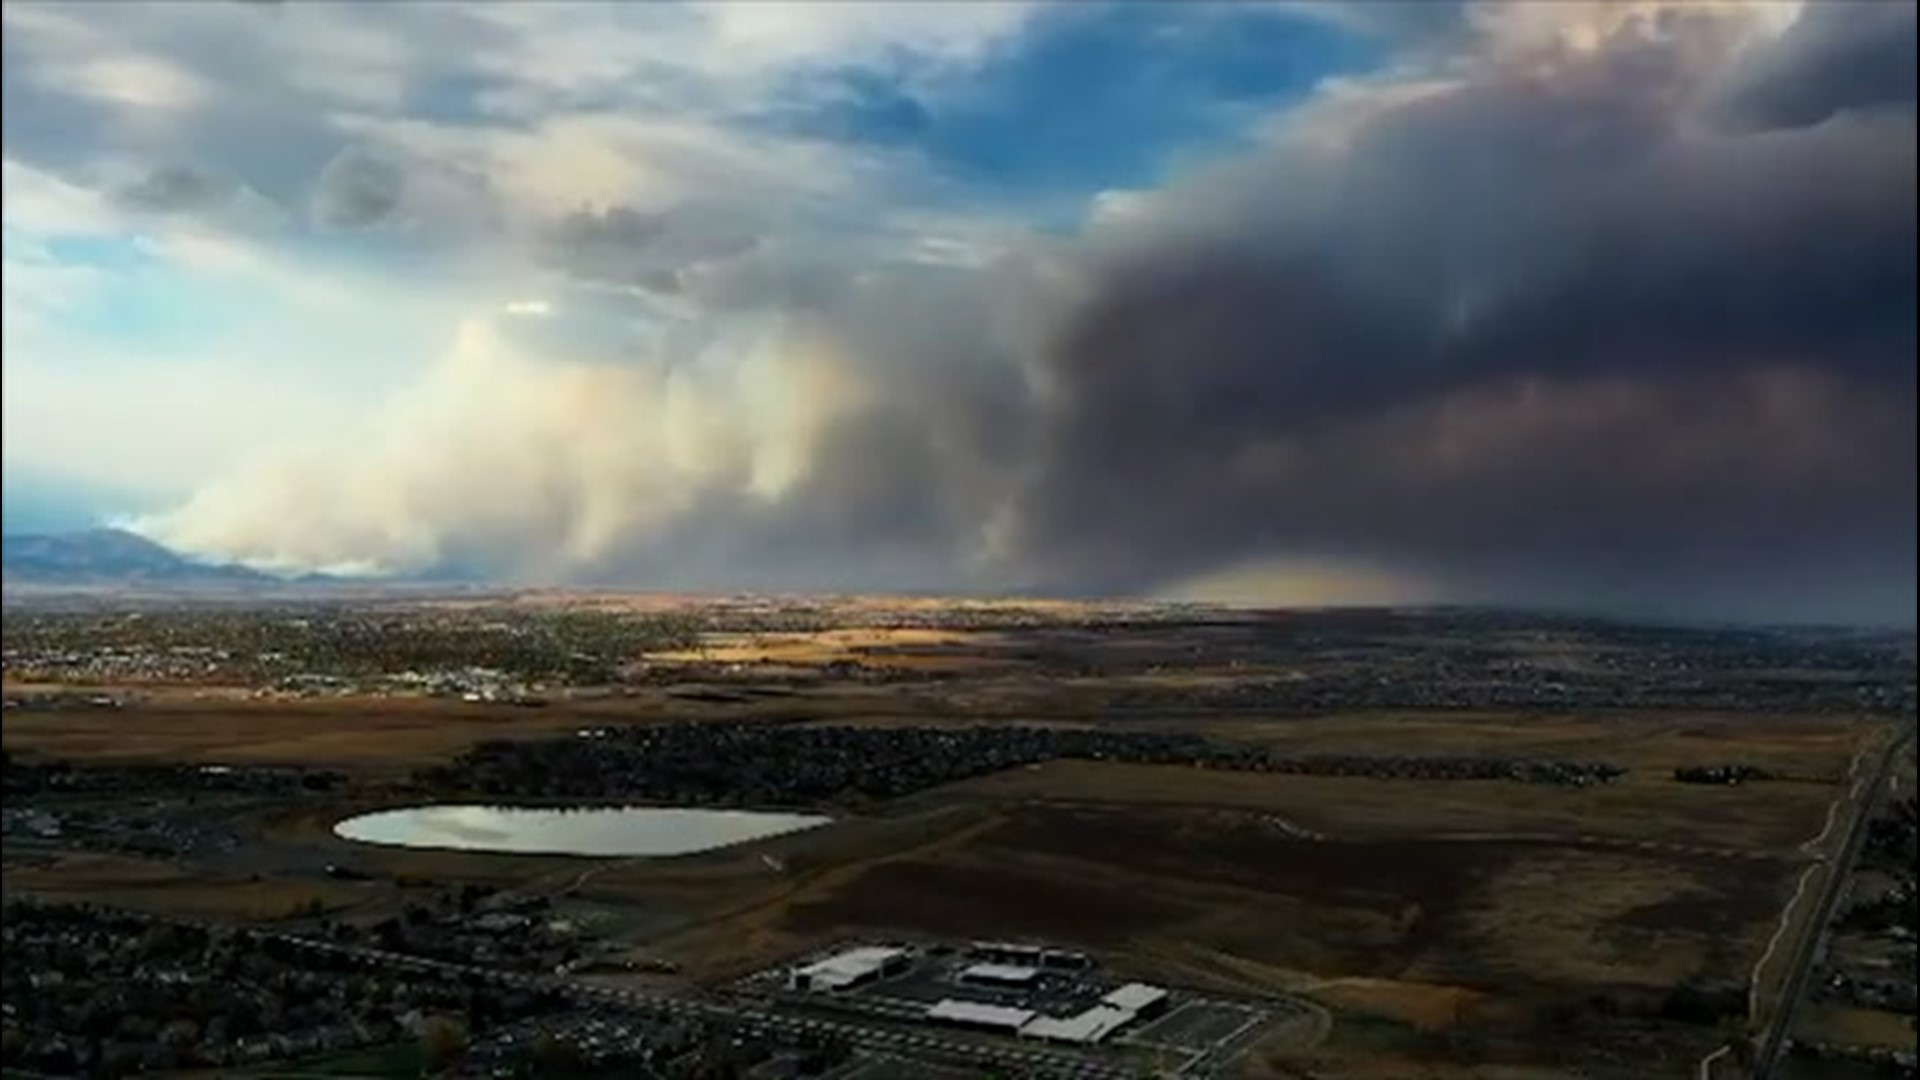 The CalWood Fire sent smoke billowing into the sky in Broomfield, Colorado, on Saturday, Oct. 17.